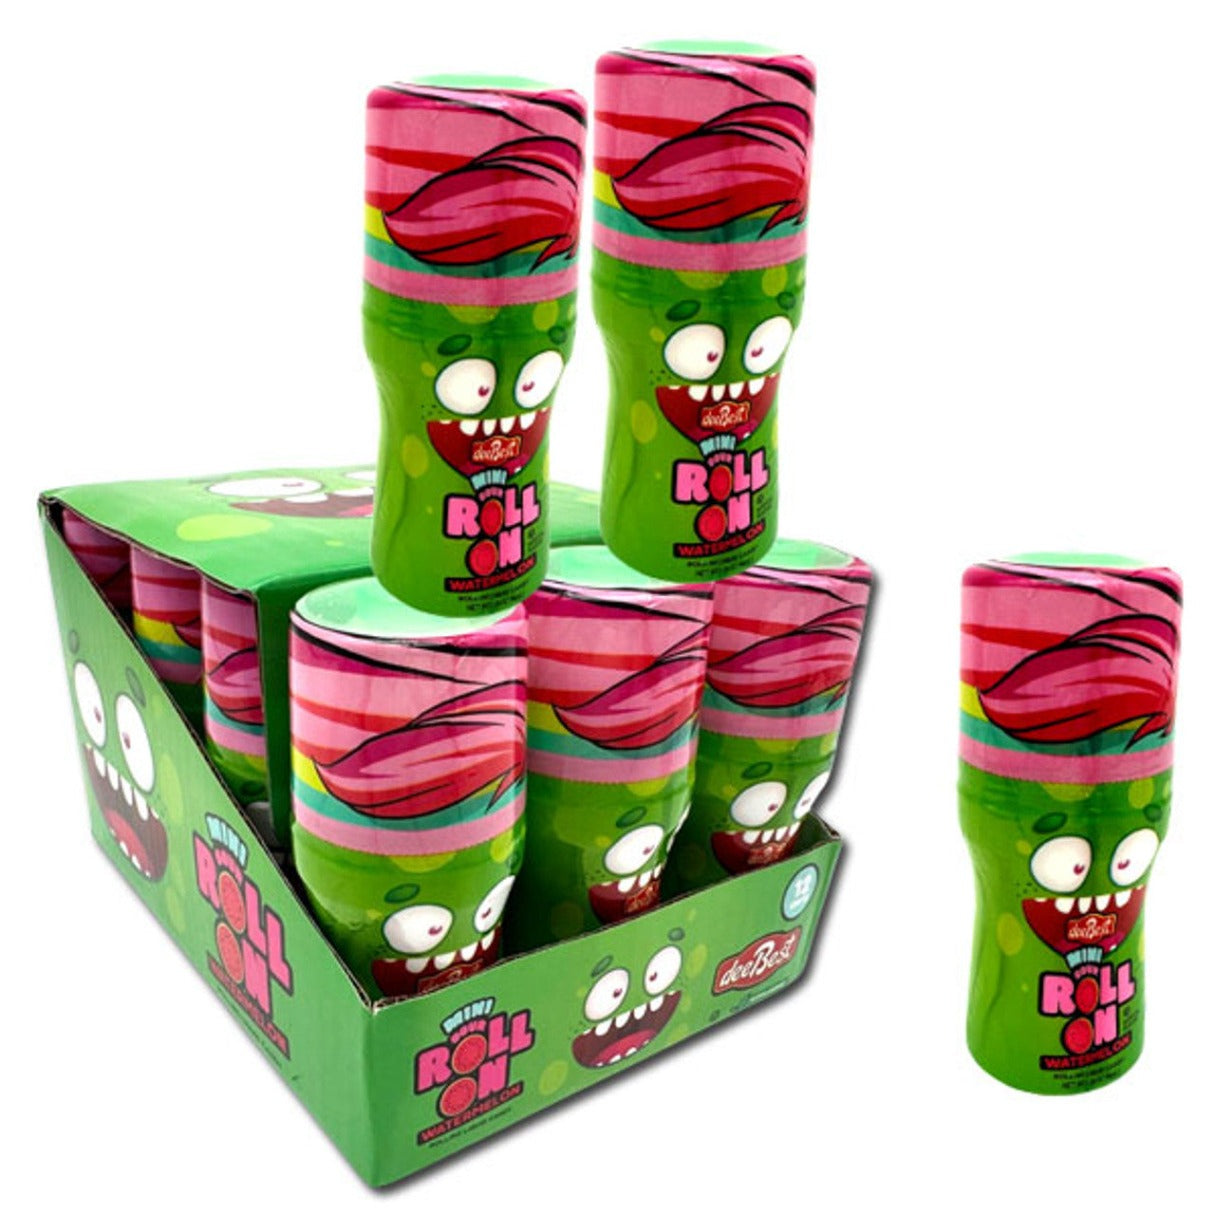 Dee Best Mini Sour Roll On Watermelon Candy 1.4oz - 12ct